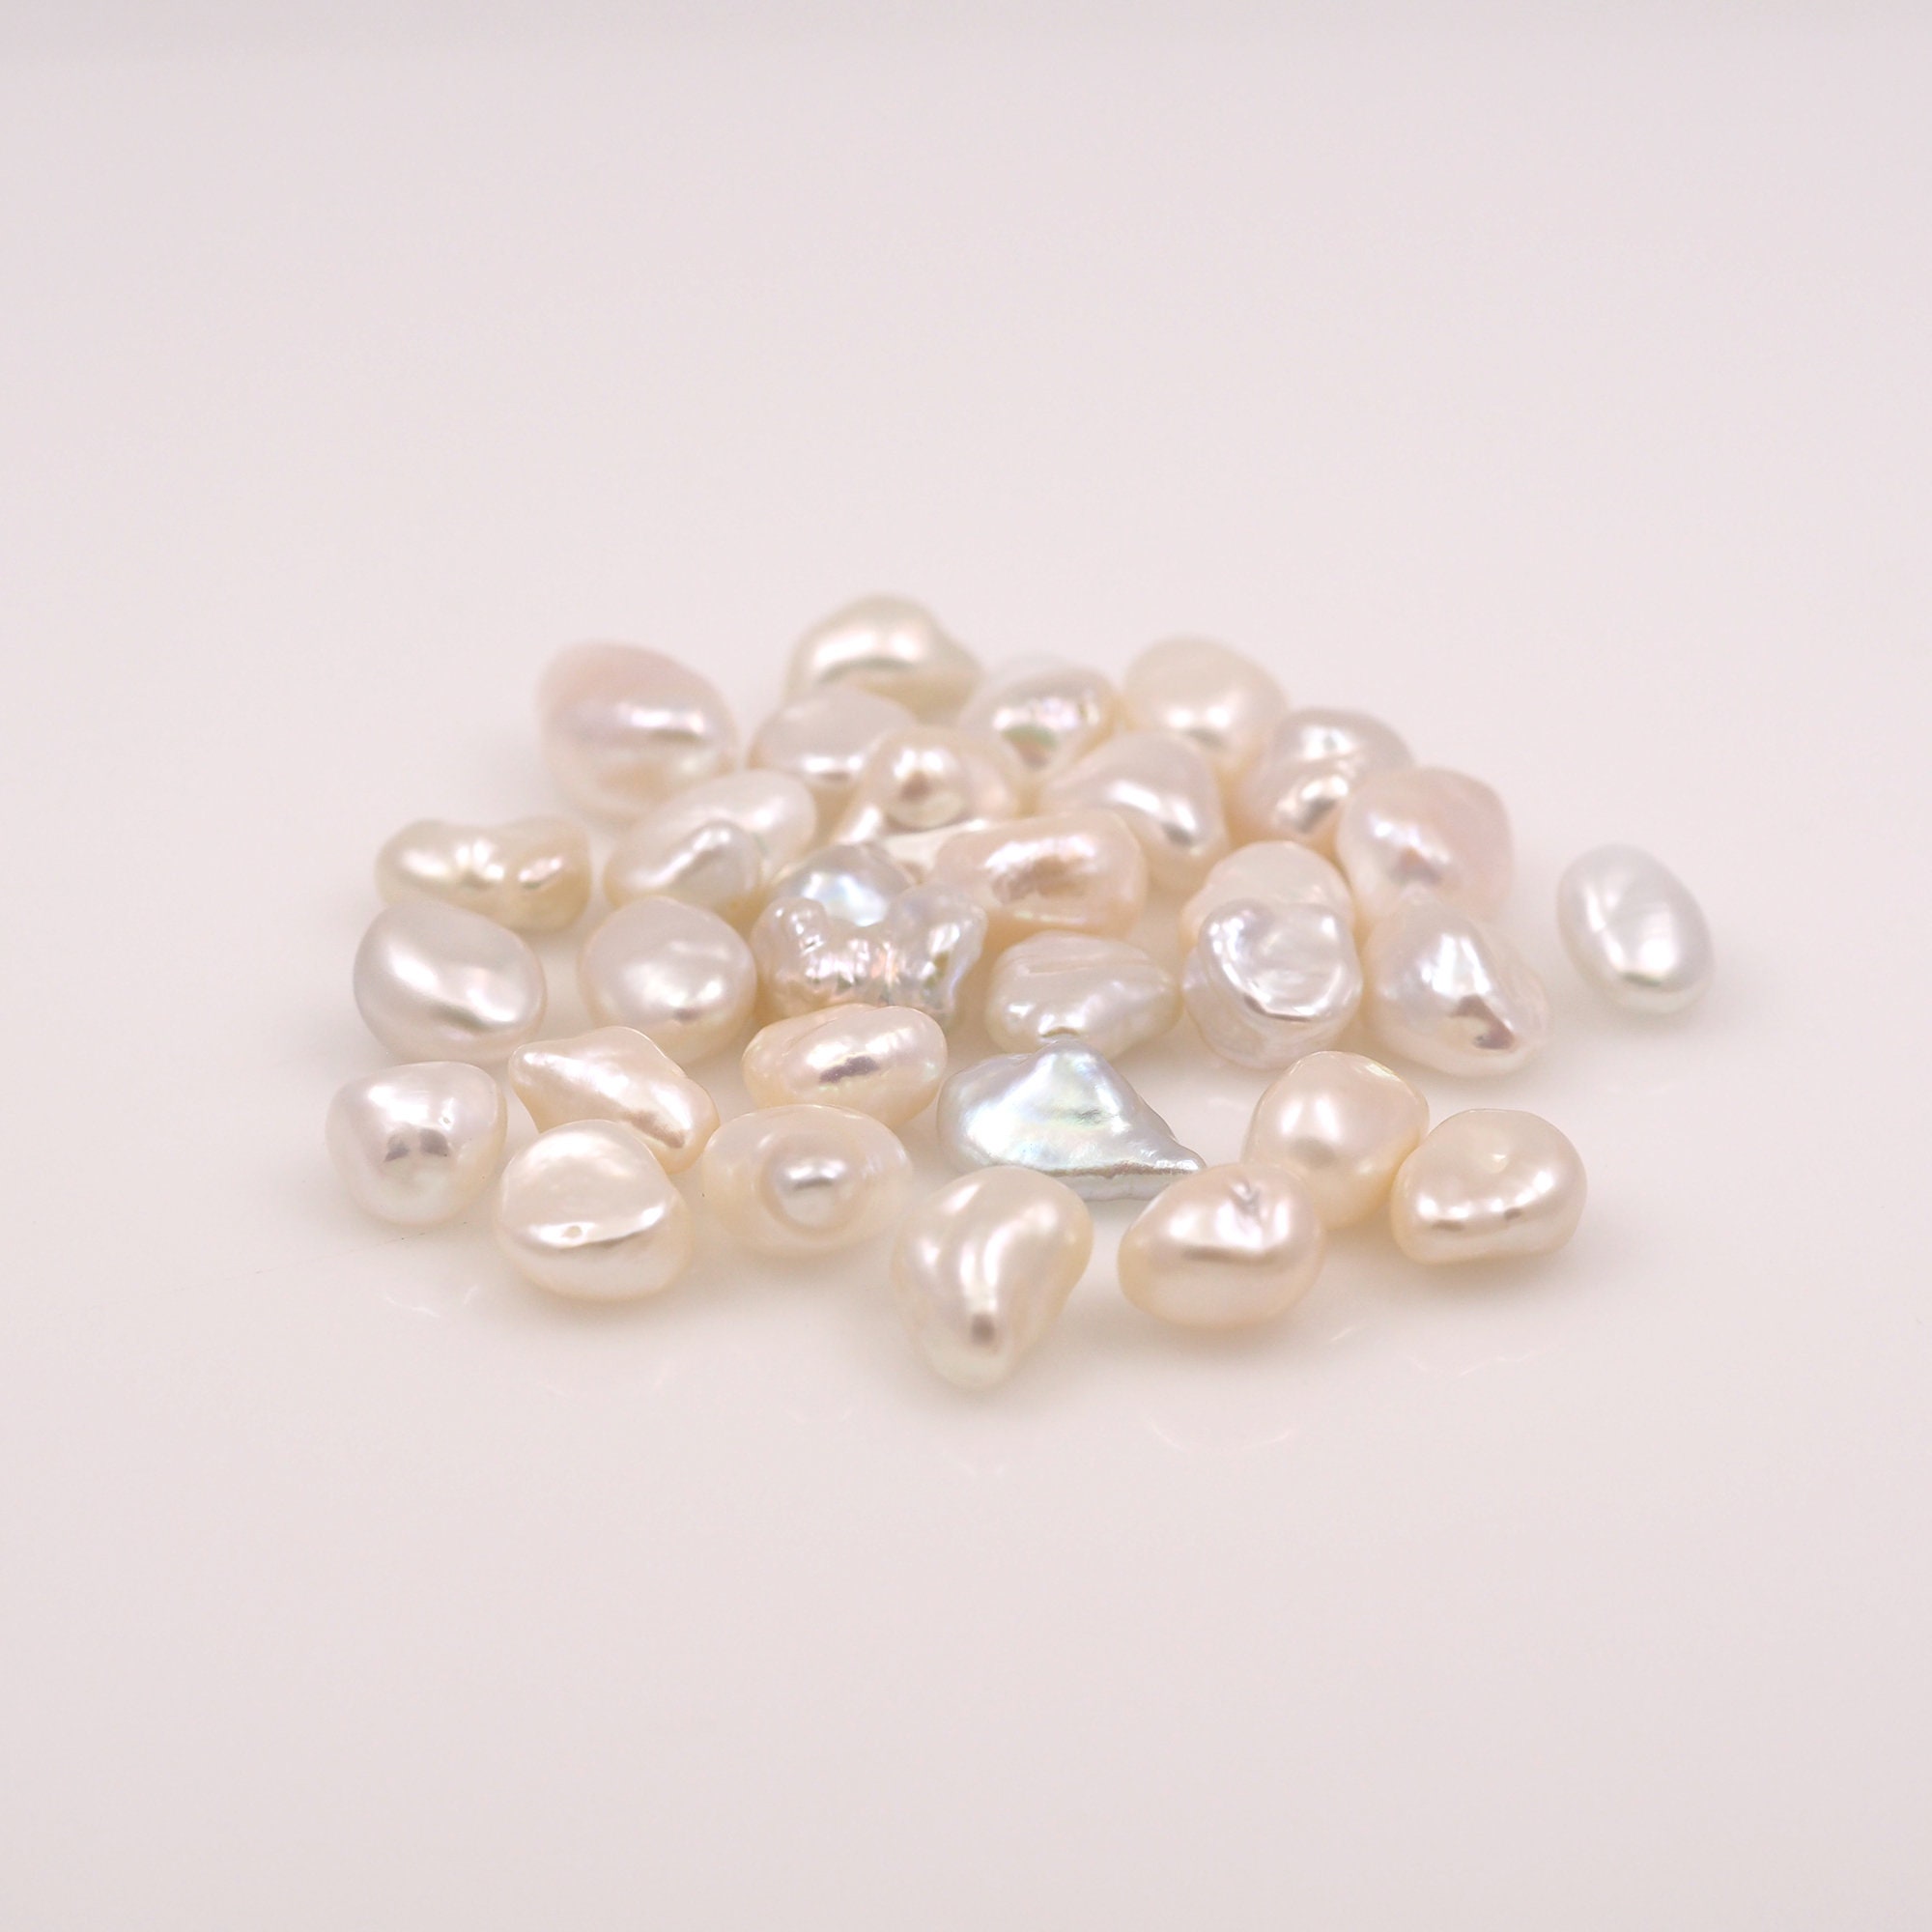  Natural Pearl Beads Natural Oval Freshwater Cultured White  Pearl Loose Beads Quality Level AAA for Jewelry Making Charms Necklace as  Gift 5-6 mm 14.2 inches (2 Strands)